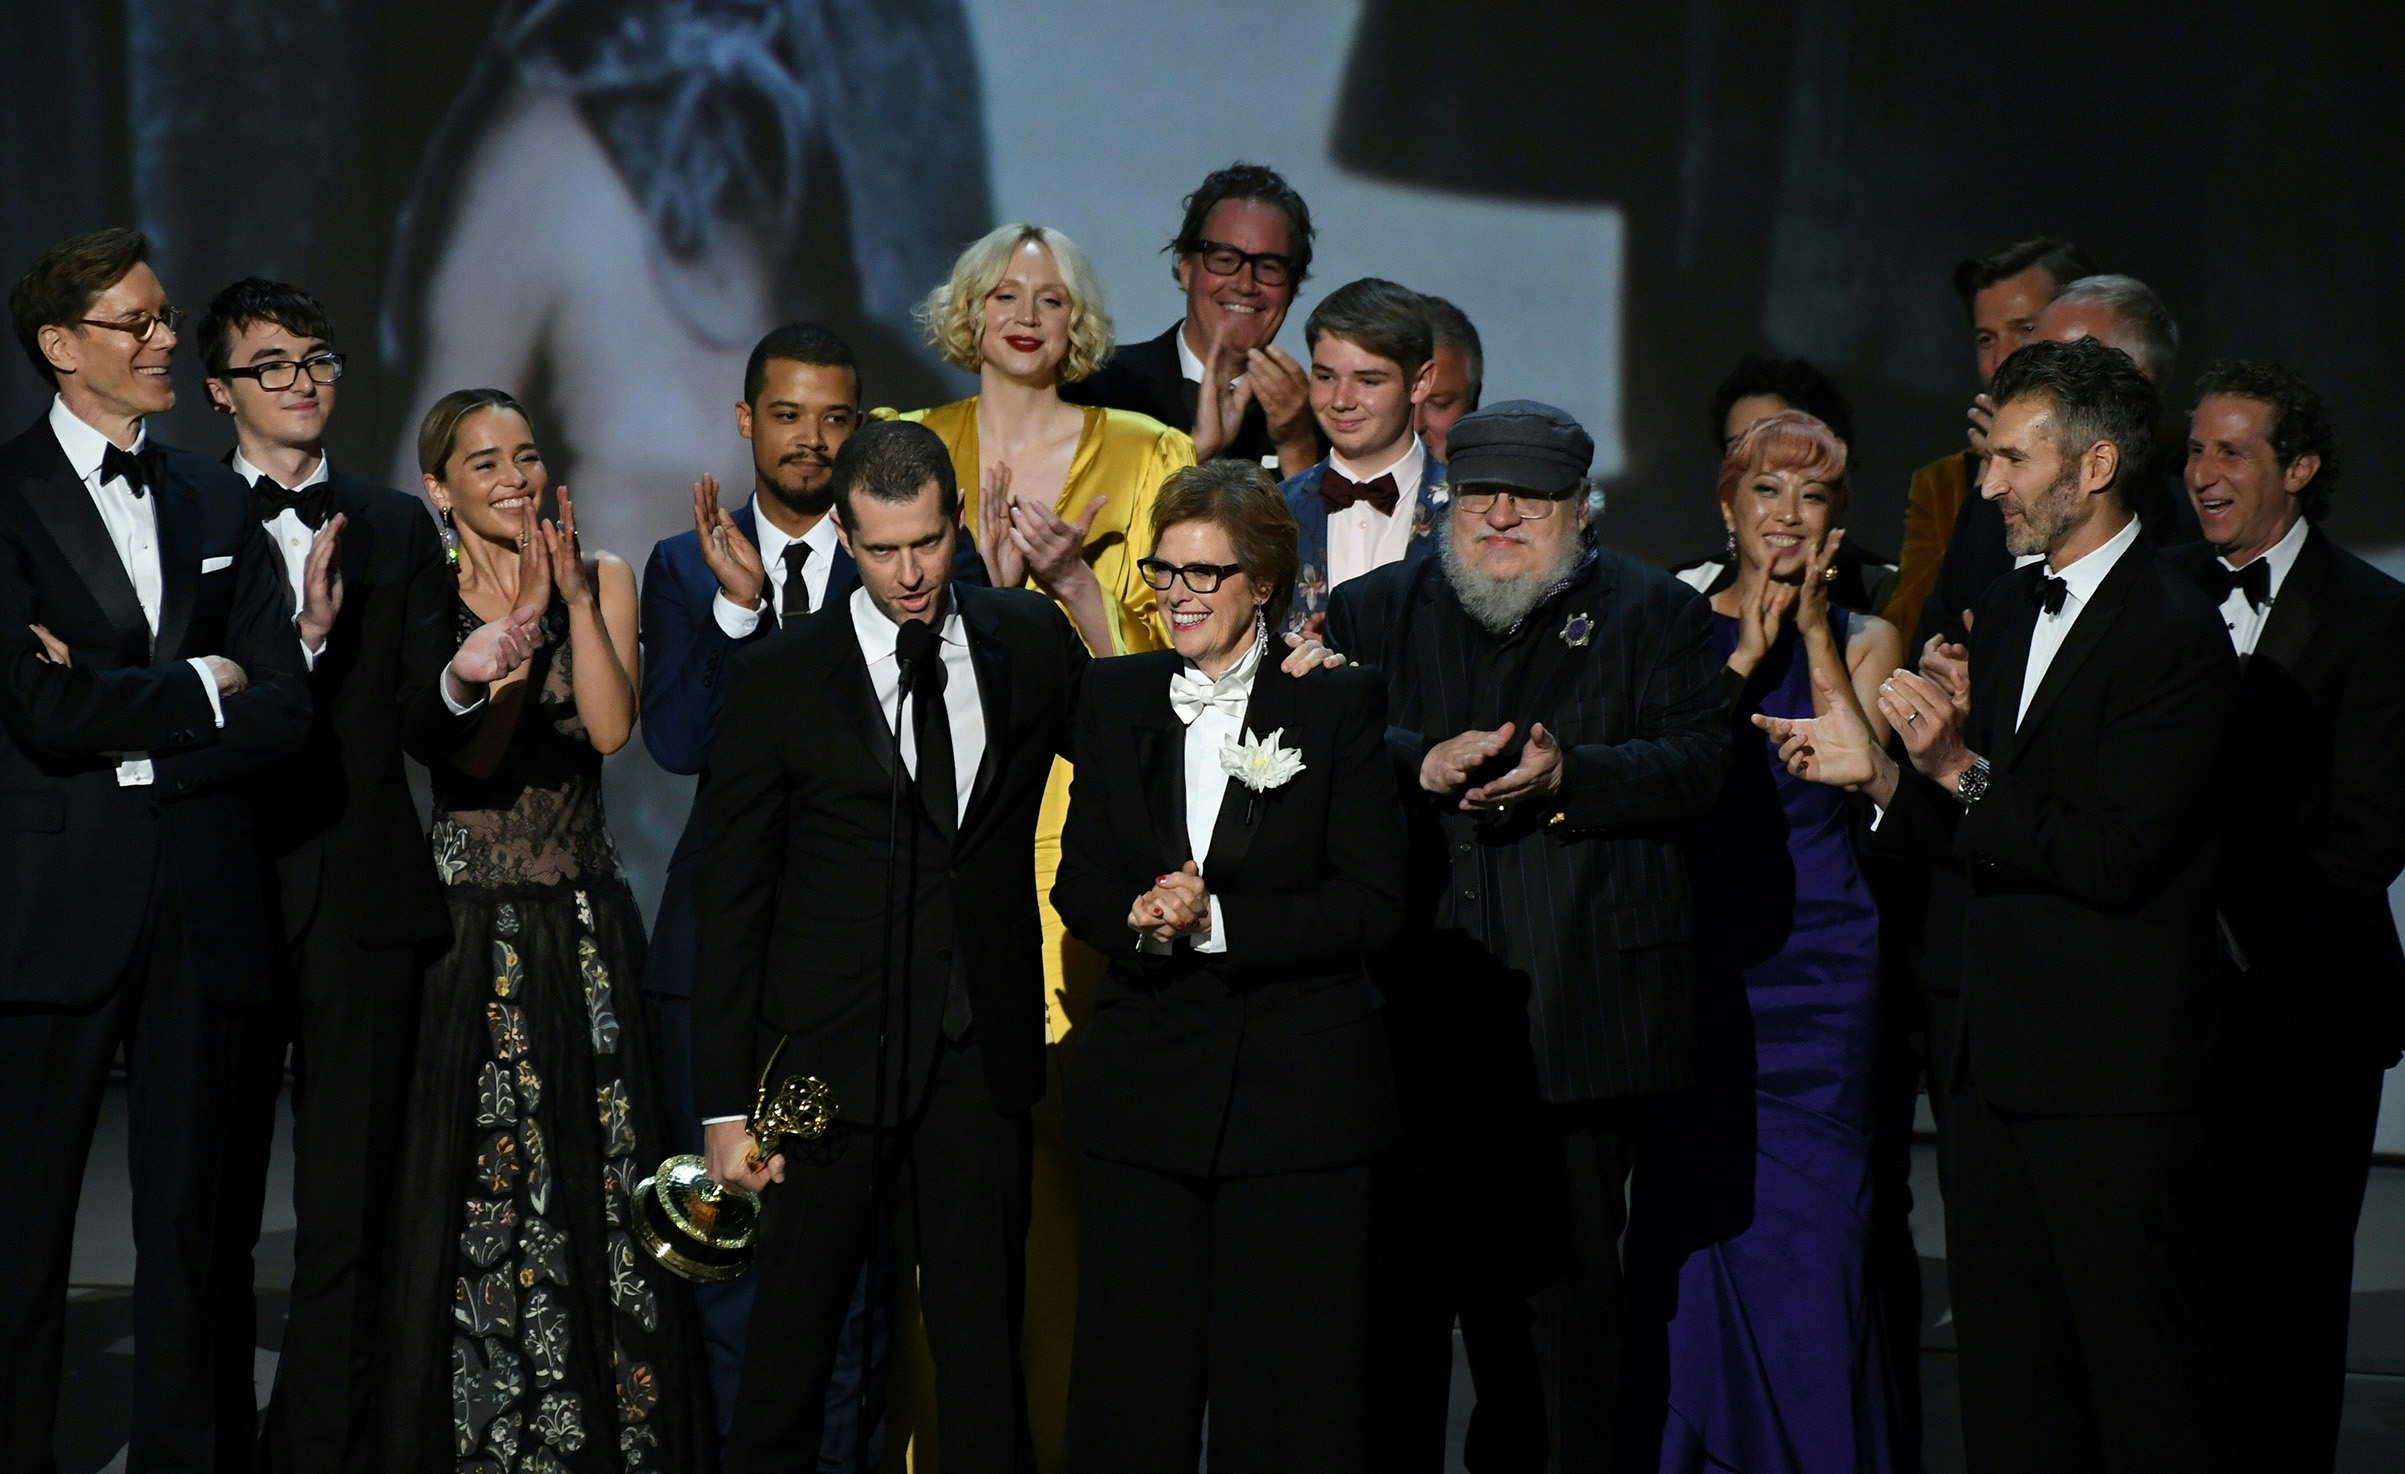 Writer-producer D.B. Weiss and the cast of "Game of Thrones" accept the award Outstanding Drama series  onstage during the 70th Emmy Awards at the Microsoft Theatre in Los Angeles on Sept. 17, 2018. (Robyn Beck—AFP/Getty Images)